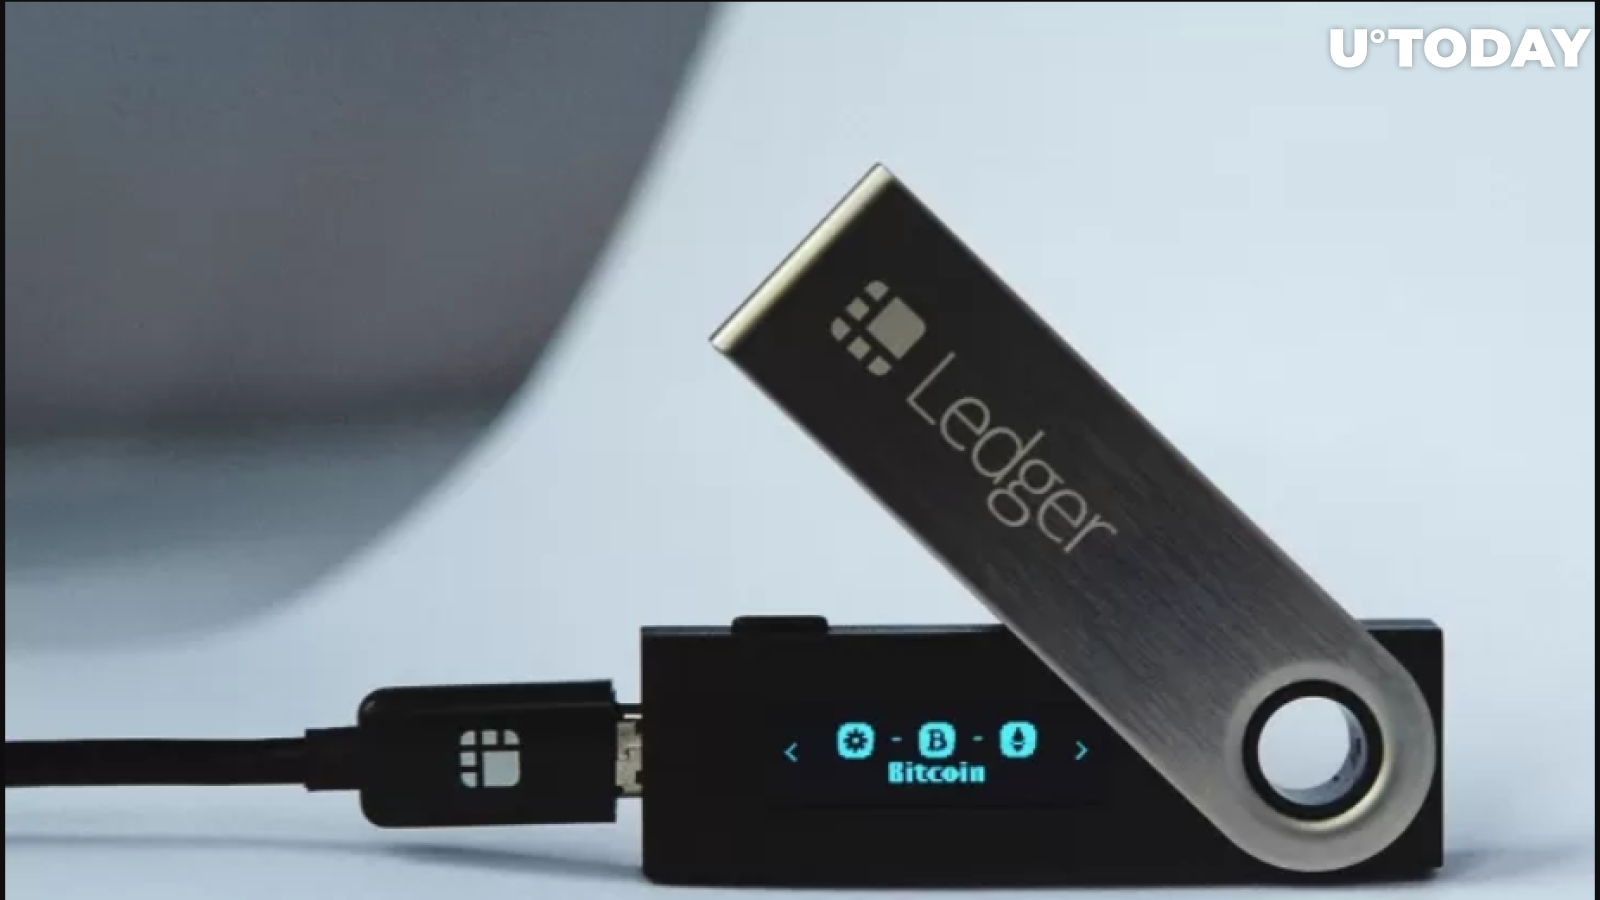 Cryptocurrency Wallet Ledger Debuts Version 2.0 of Its Application. What's New?